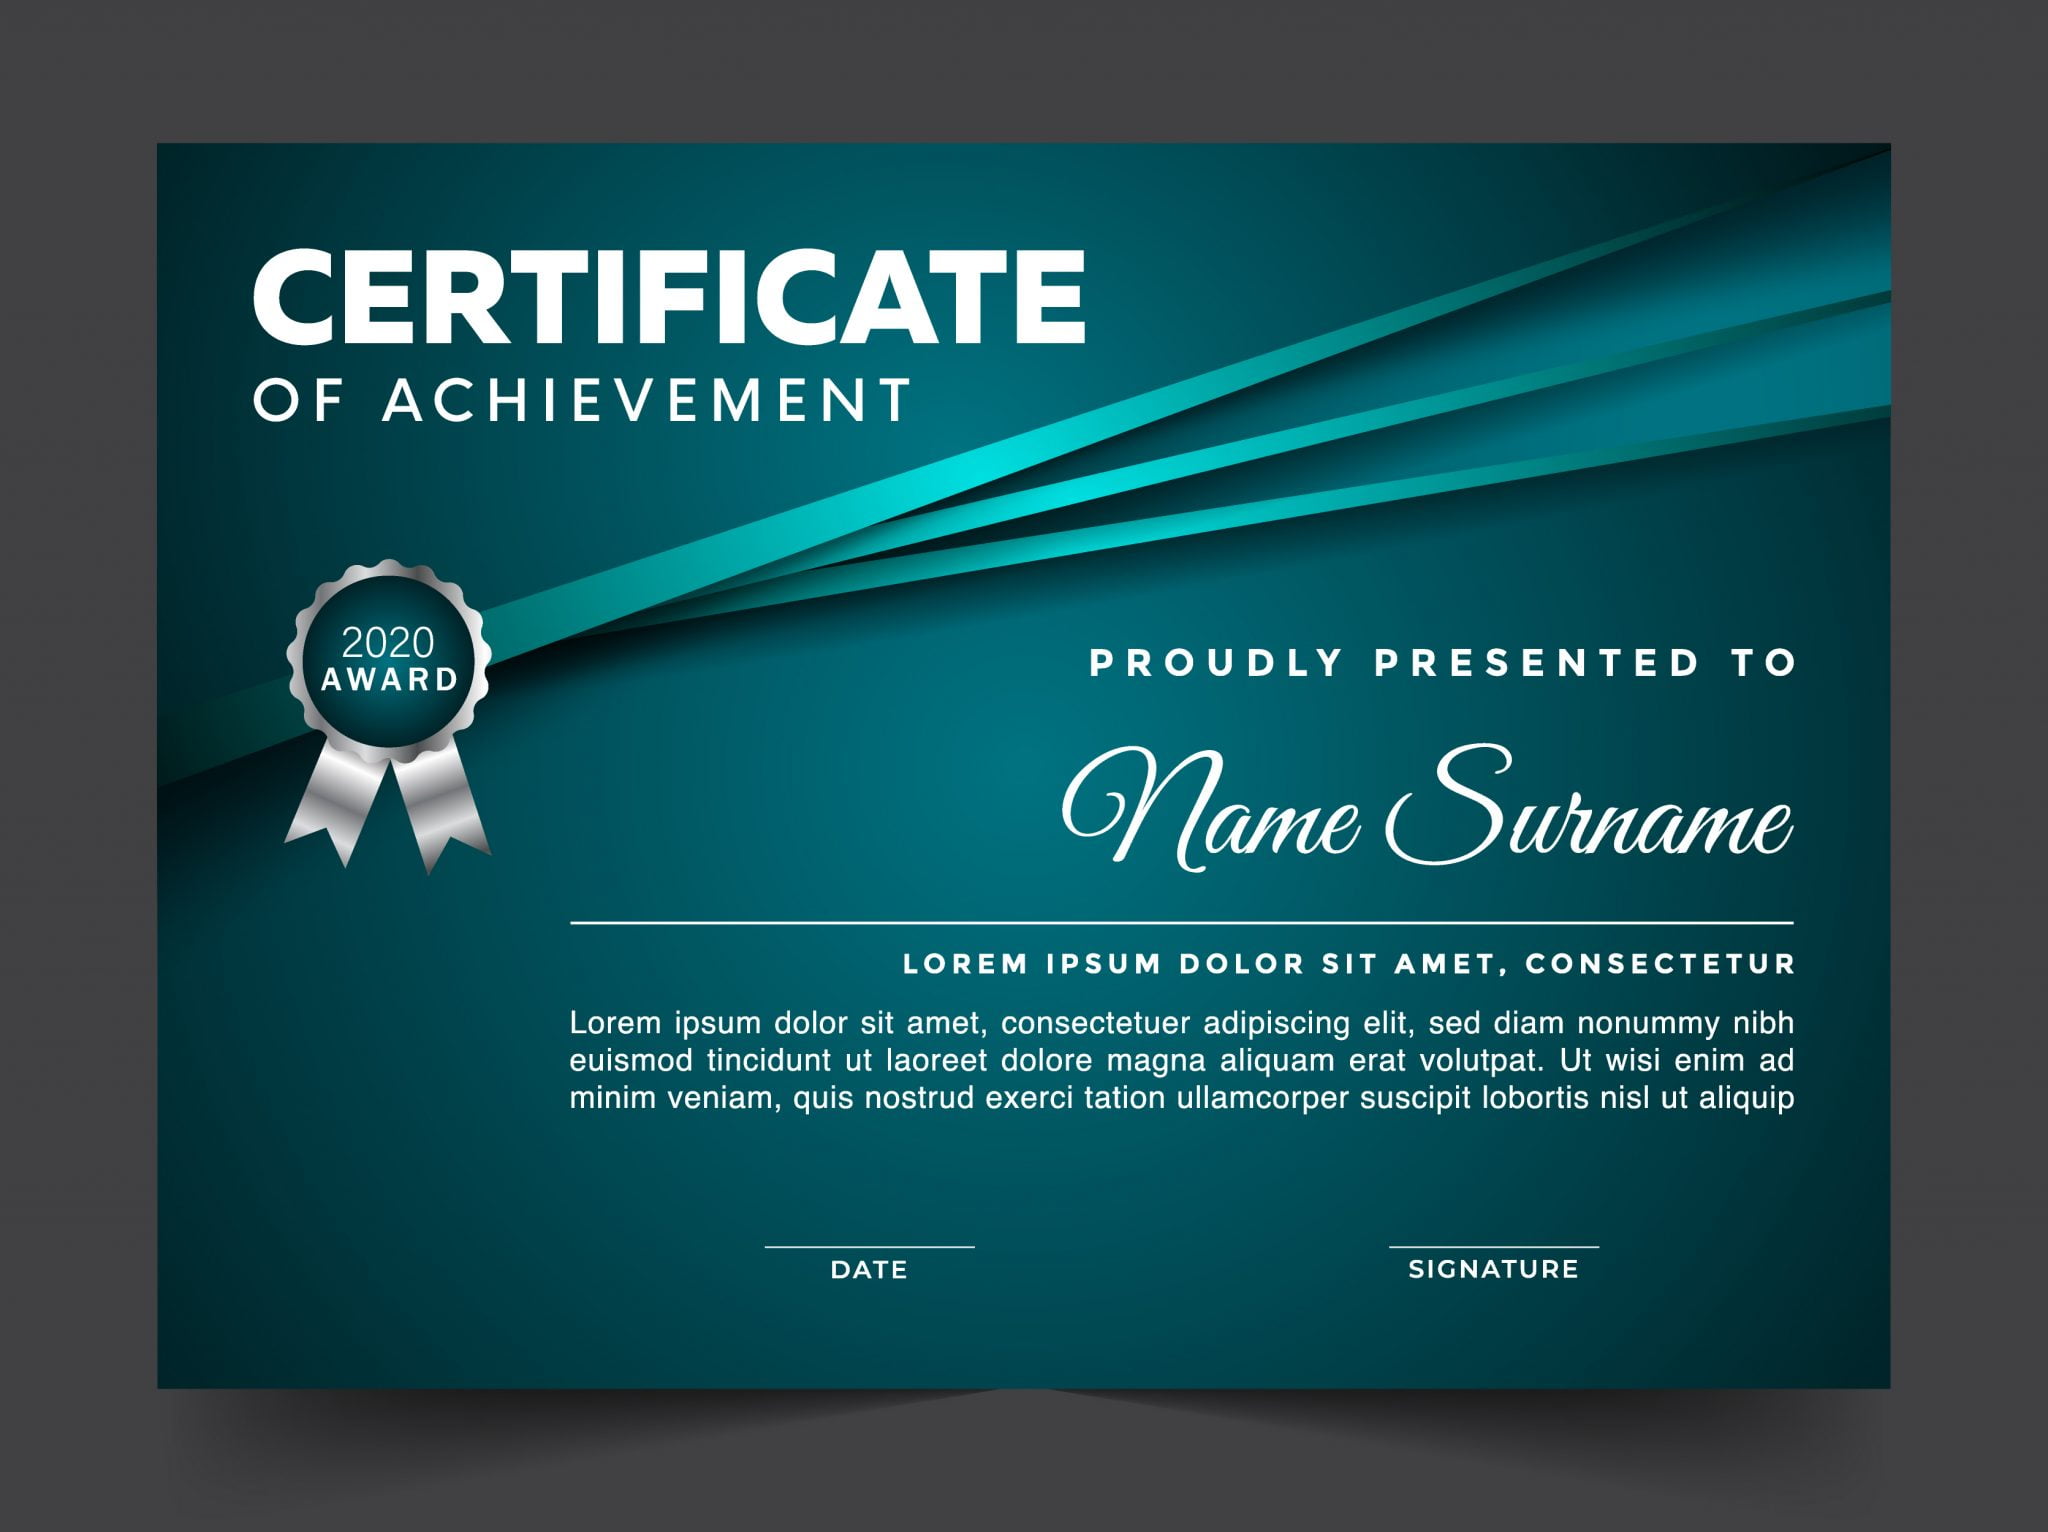 certificate templates for photoshop cs3 free download